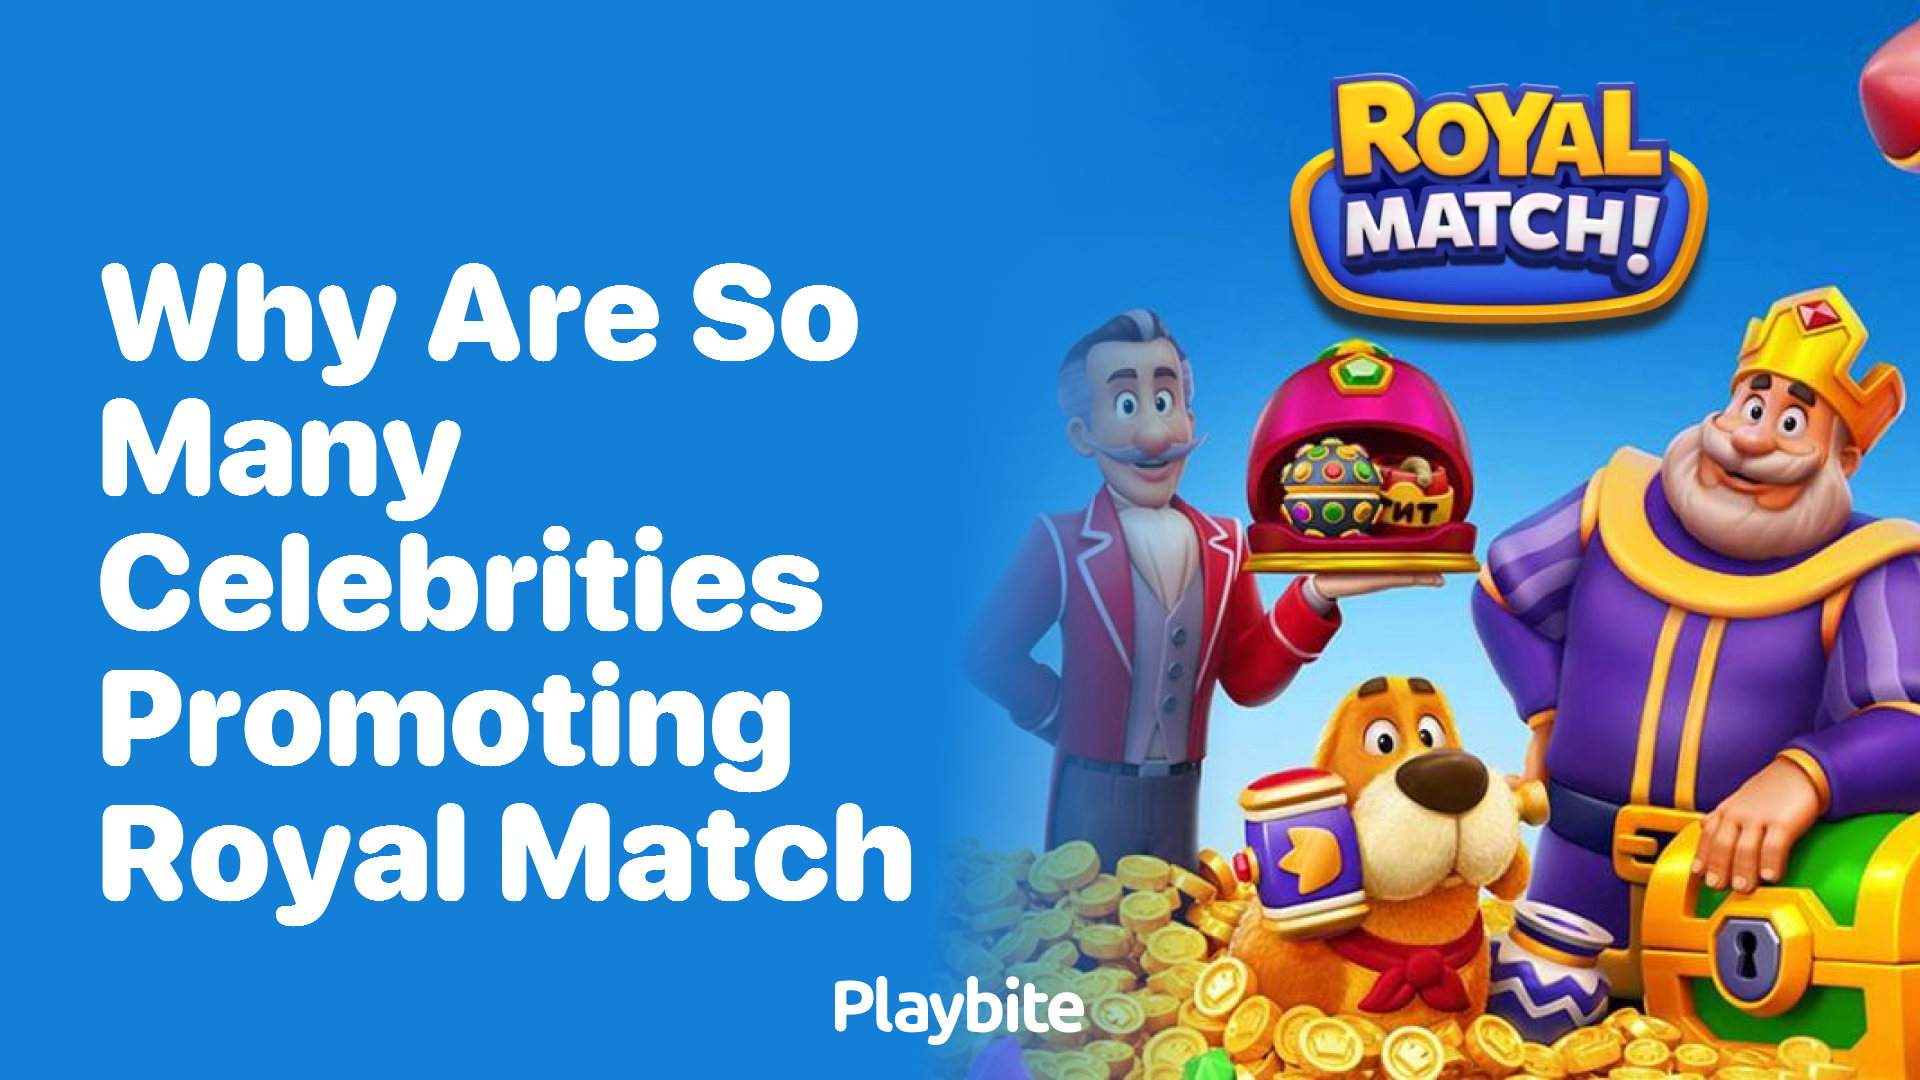 Why Are So Many Celebrities Promoting Royal Match?